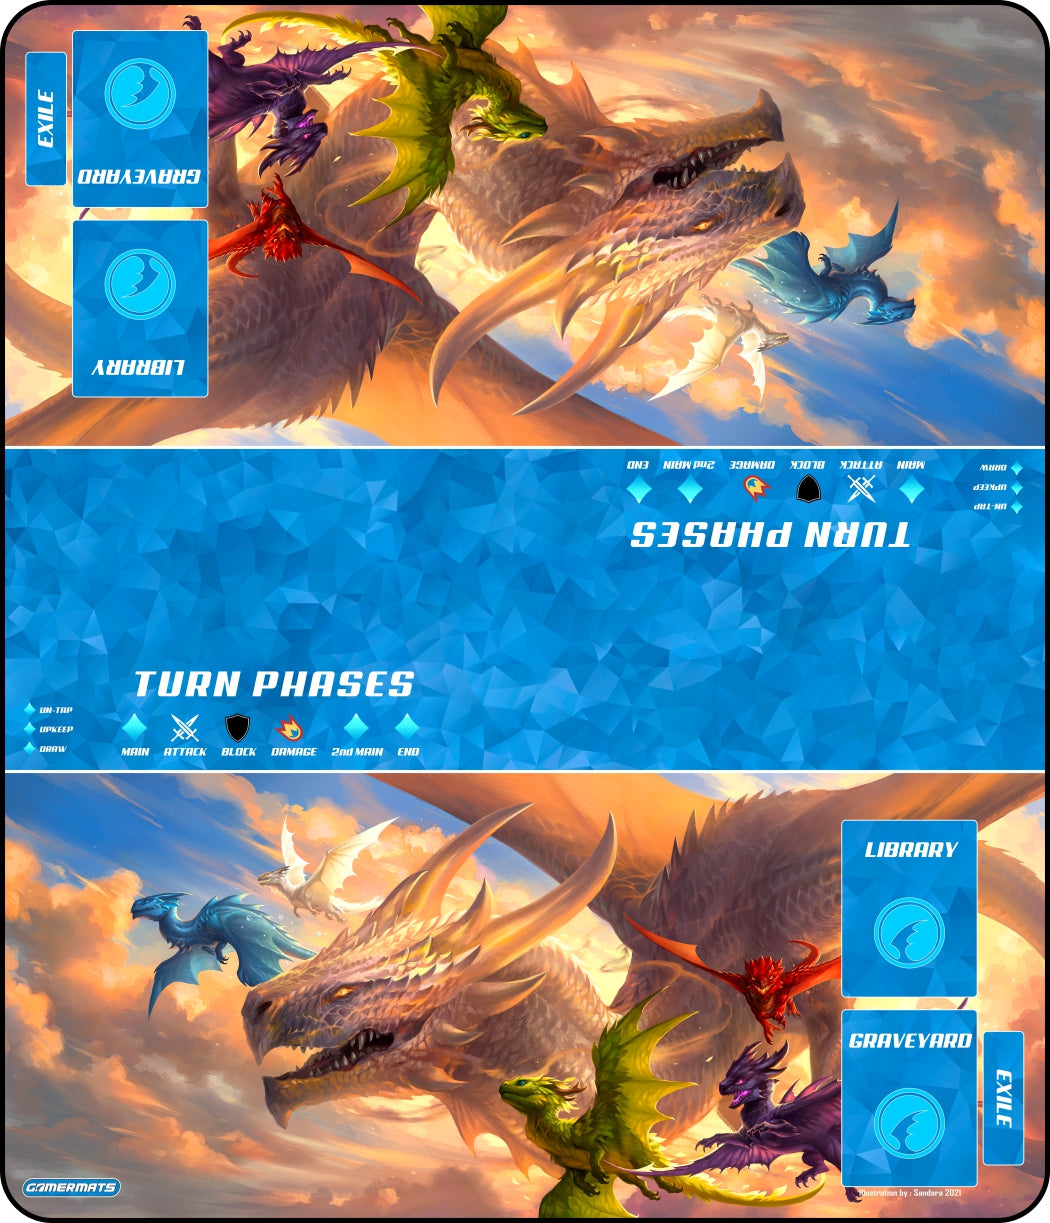 Flight Lessons - Two-Player XL Playmat Magic Compatible